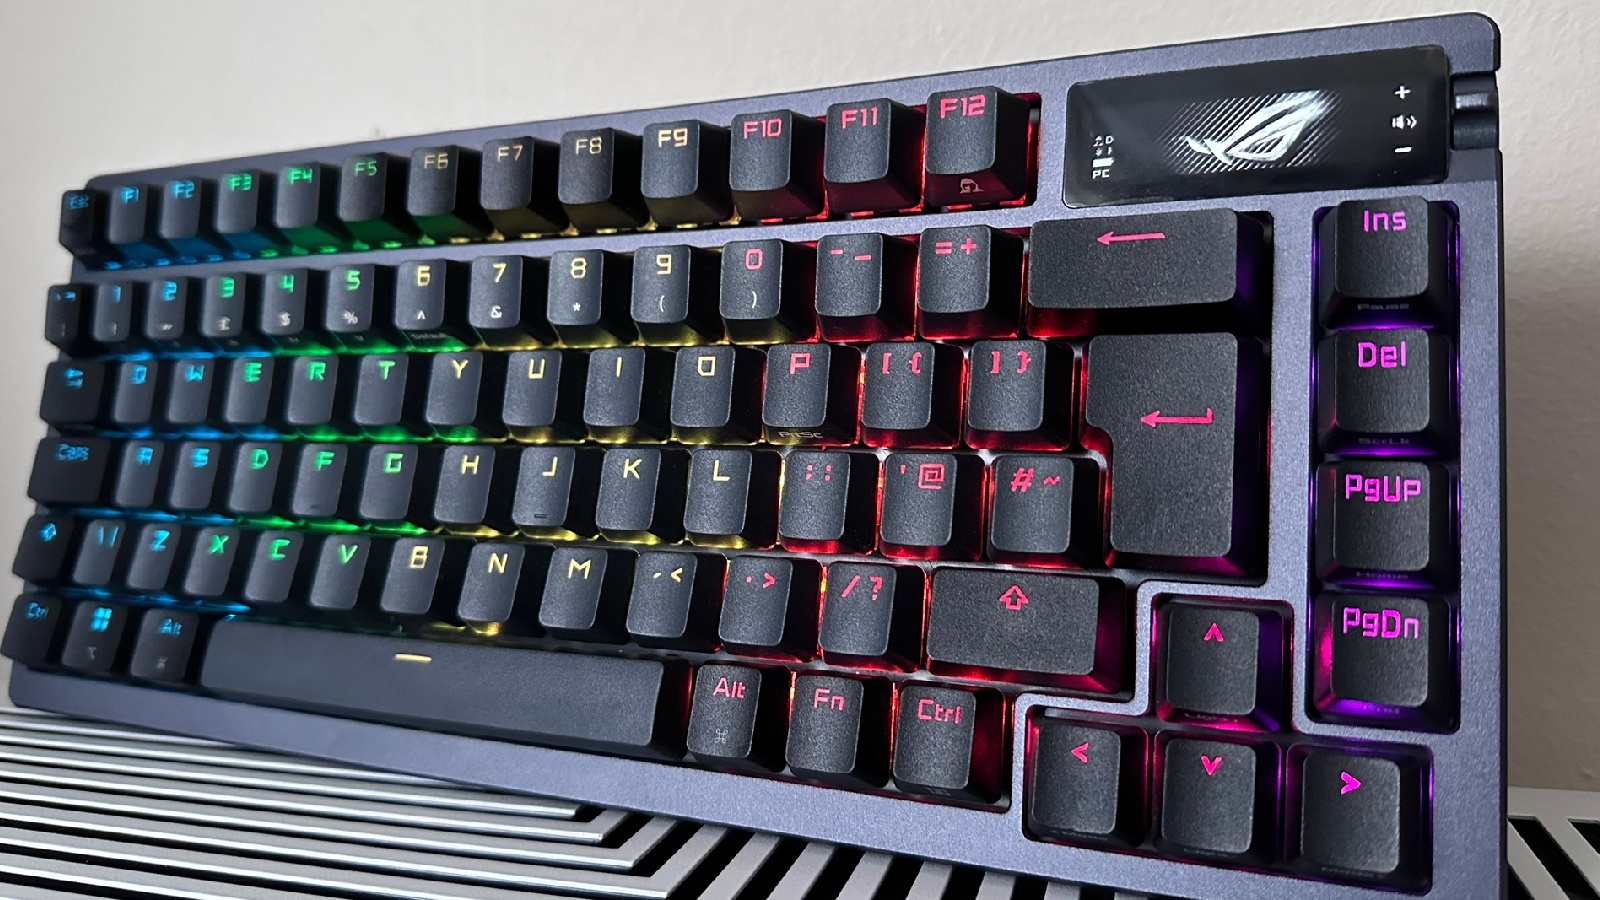 ASUS ROG Azoth review: On another level - Dexerto